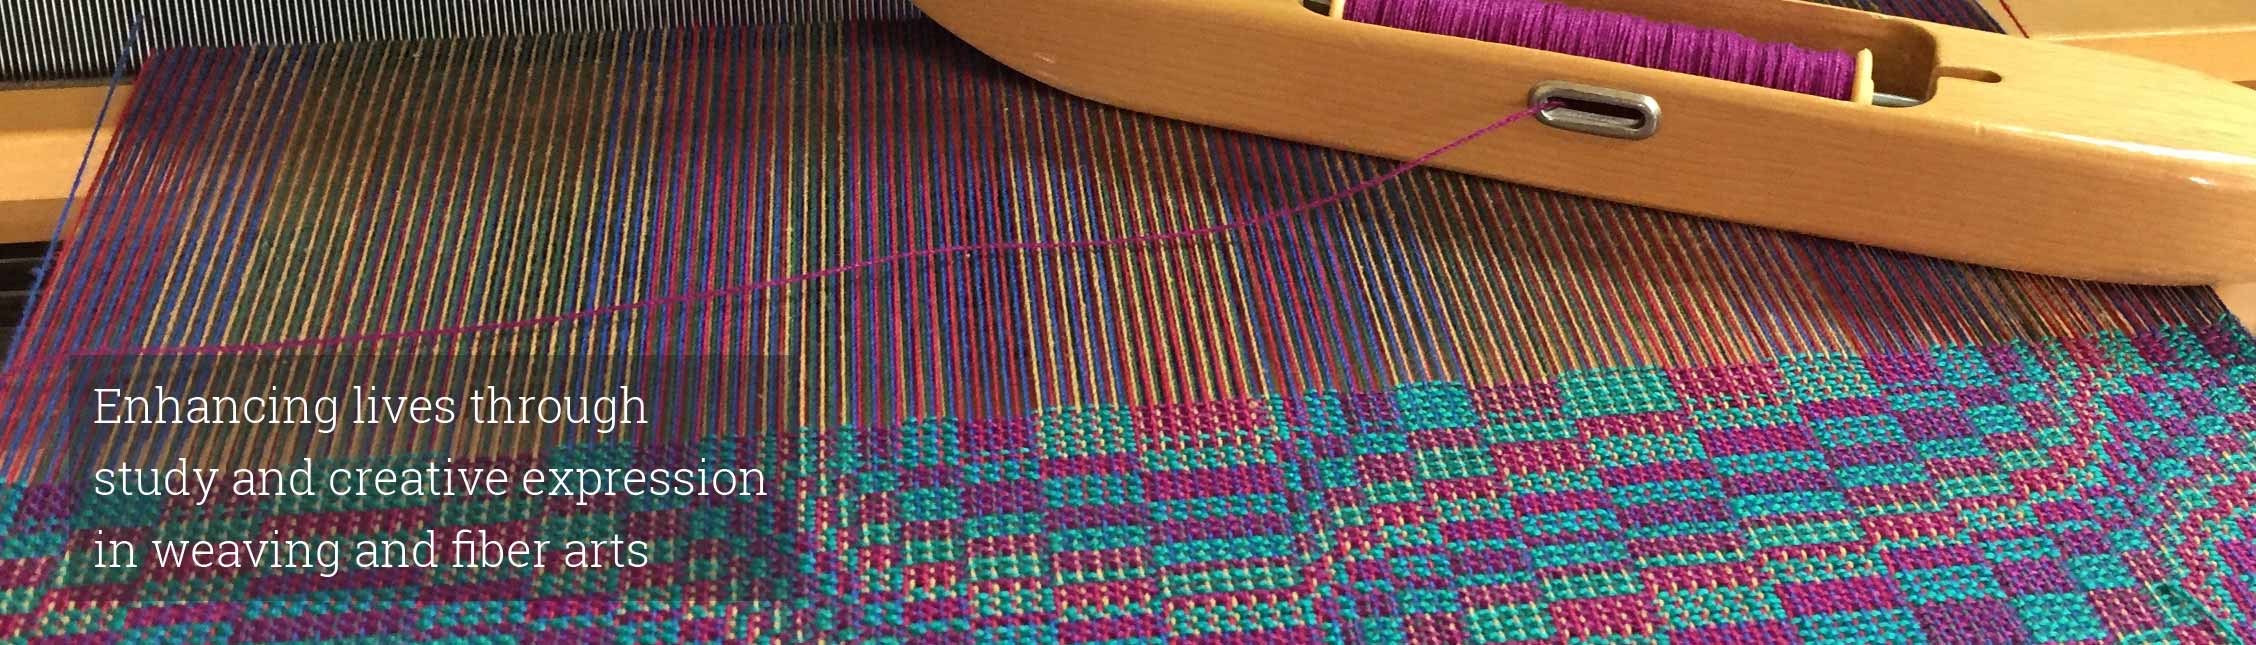 Enhancing lives through study and creative expression in weaving and fiber arts